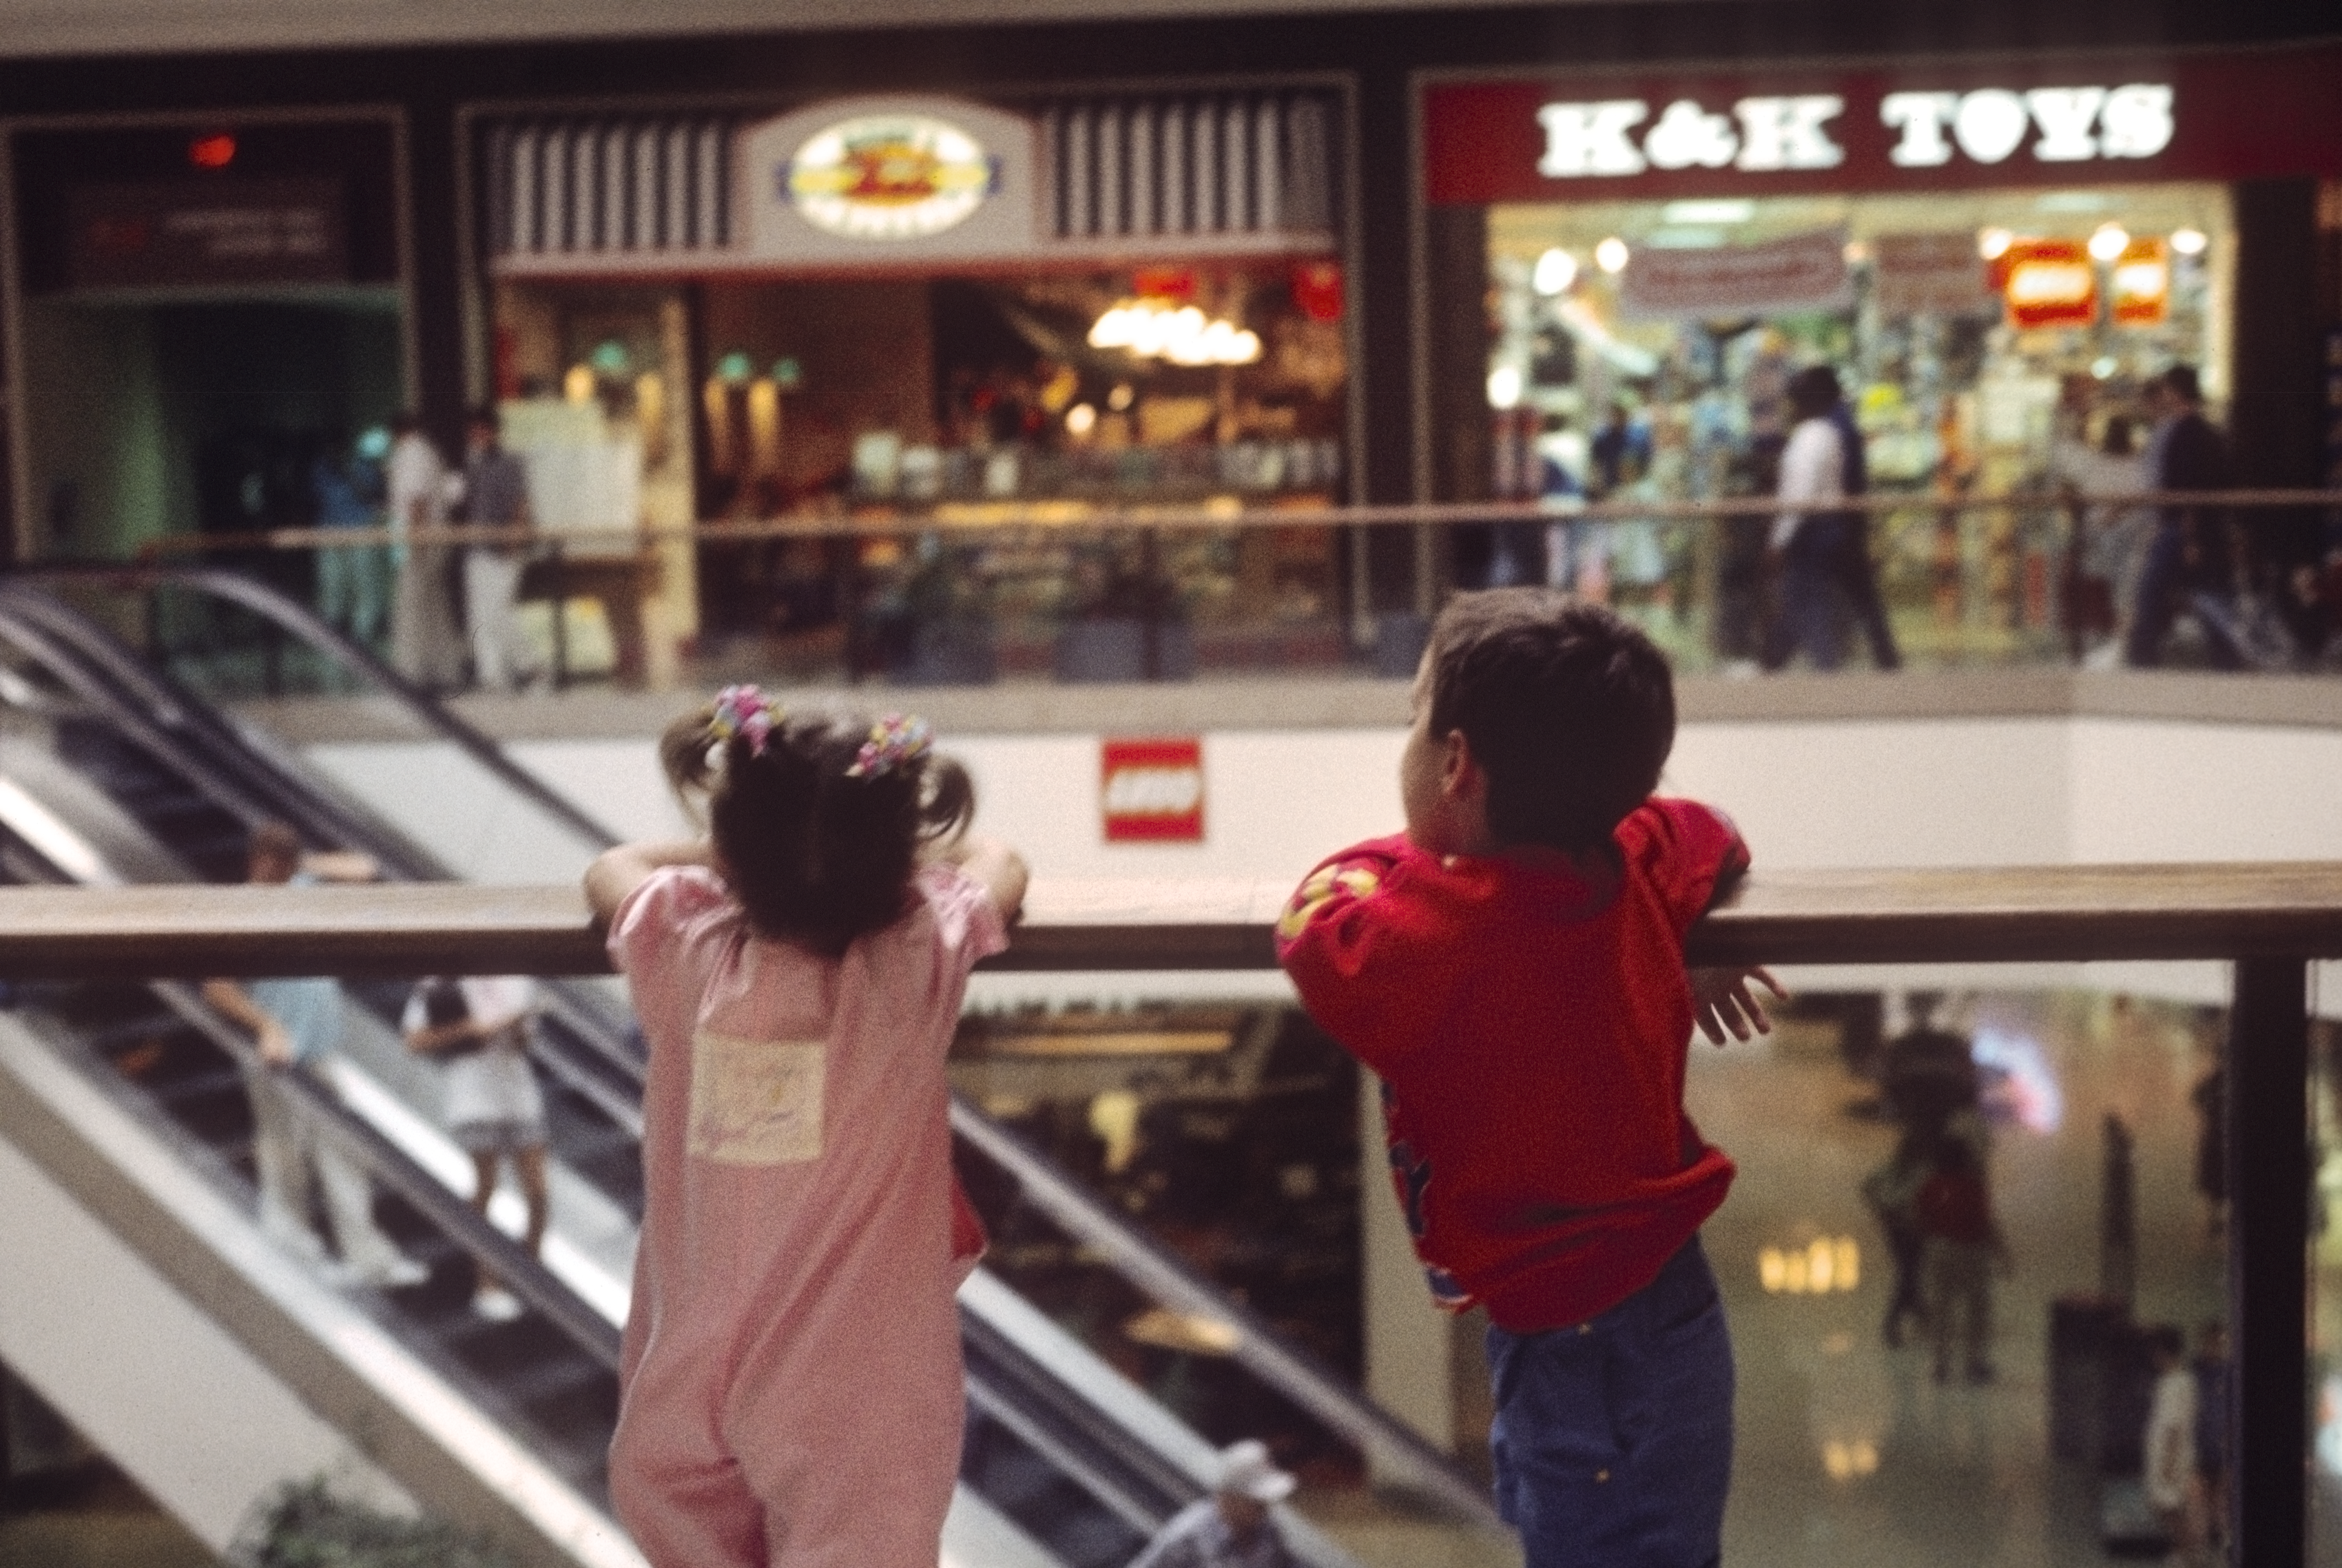 A young boy and girl looking over a second floor railing in a mall